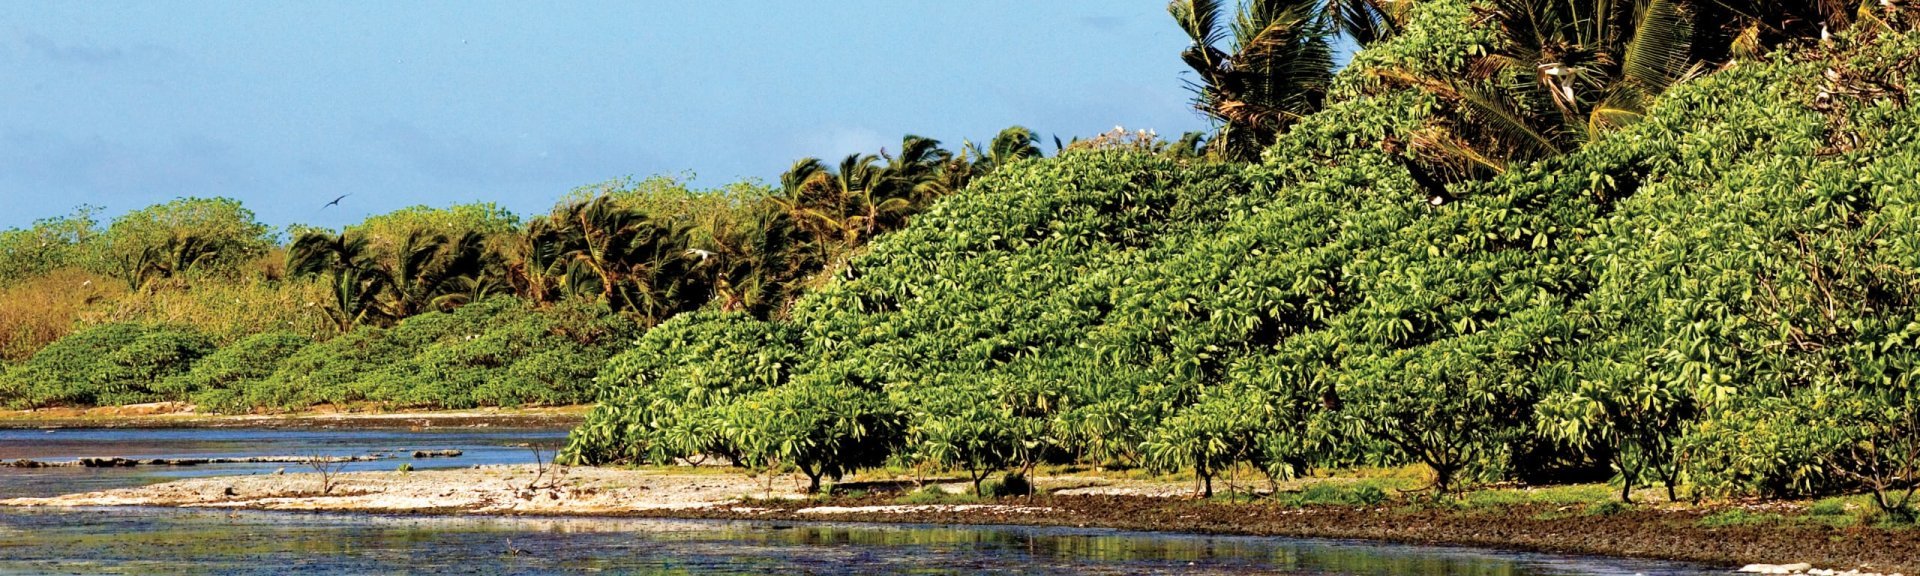 Octopus bush and coconut palms along the lagoon. Photo: Fusion films